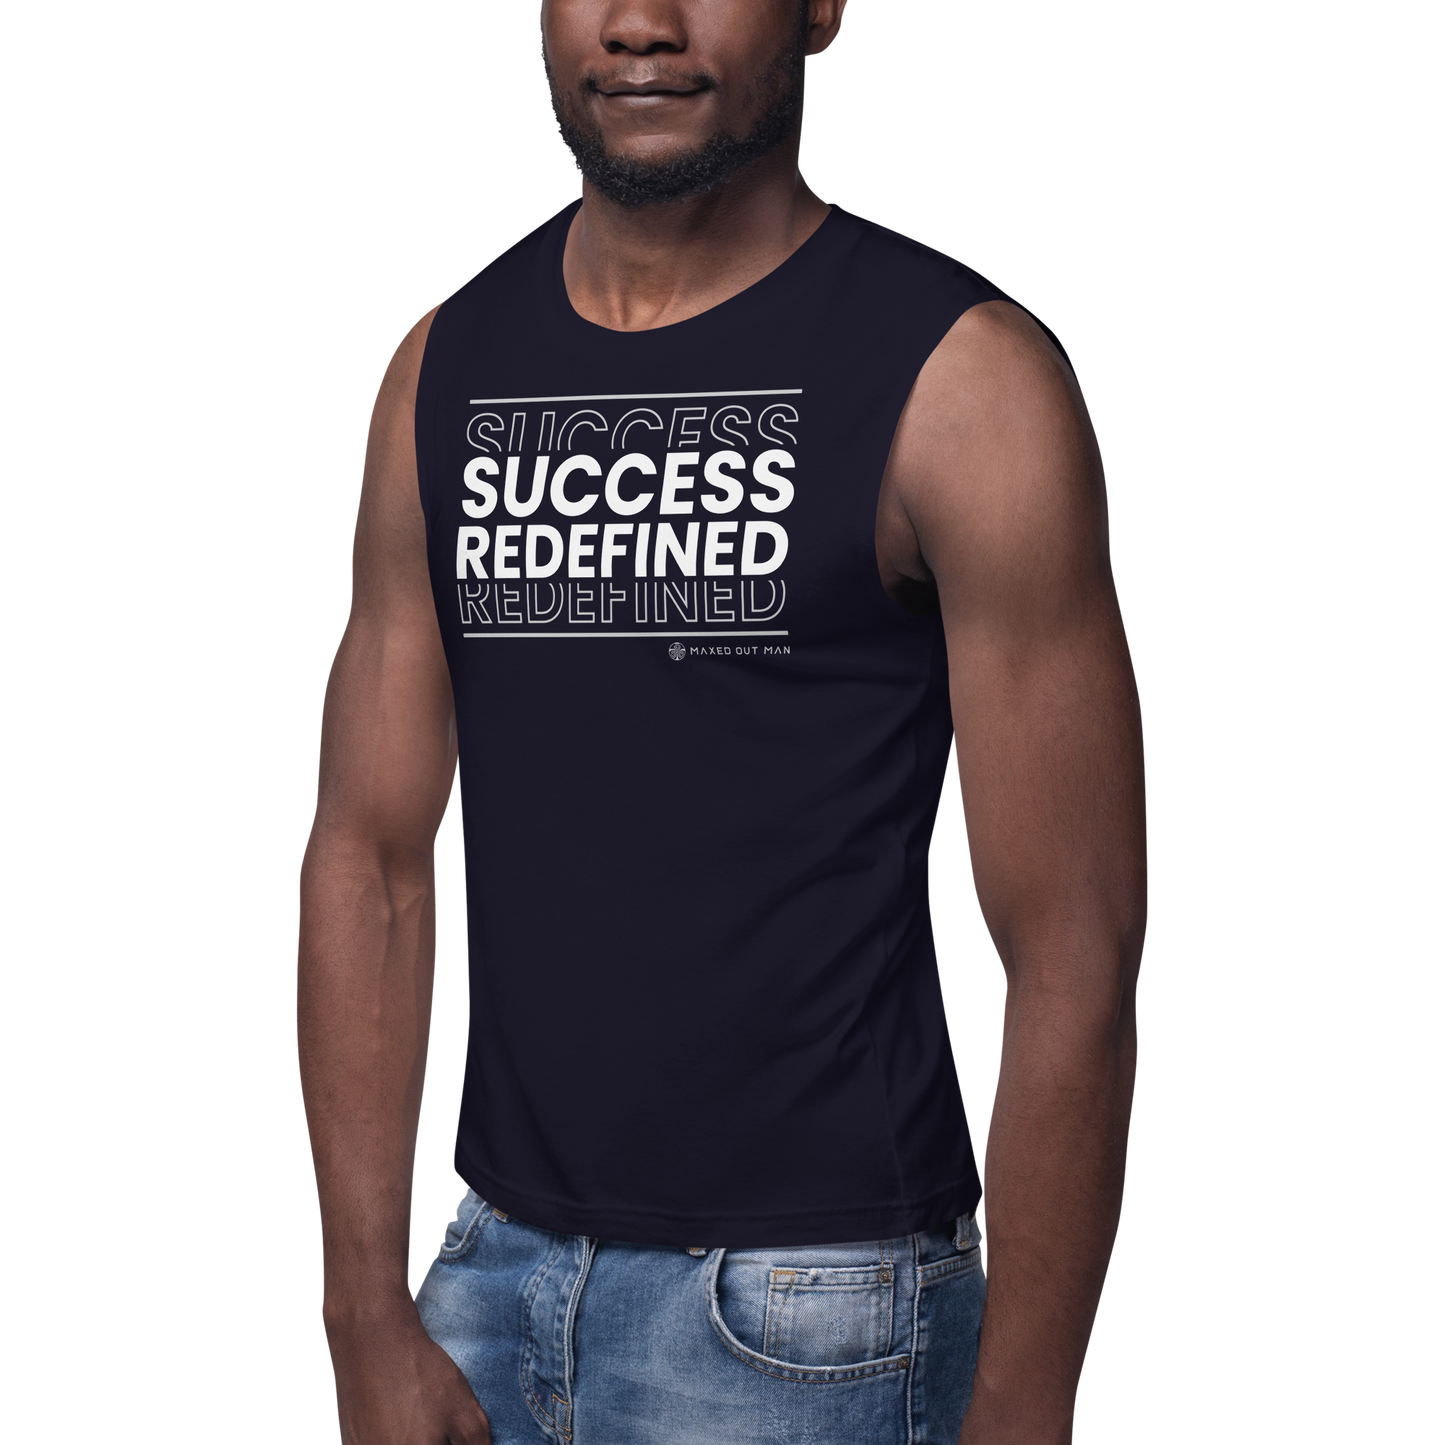 Success Redefined Muscle Shirt - Darker Colors